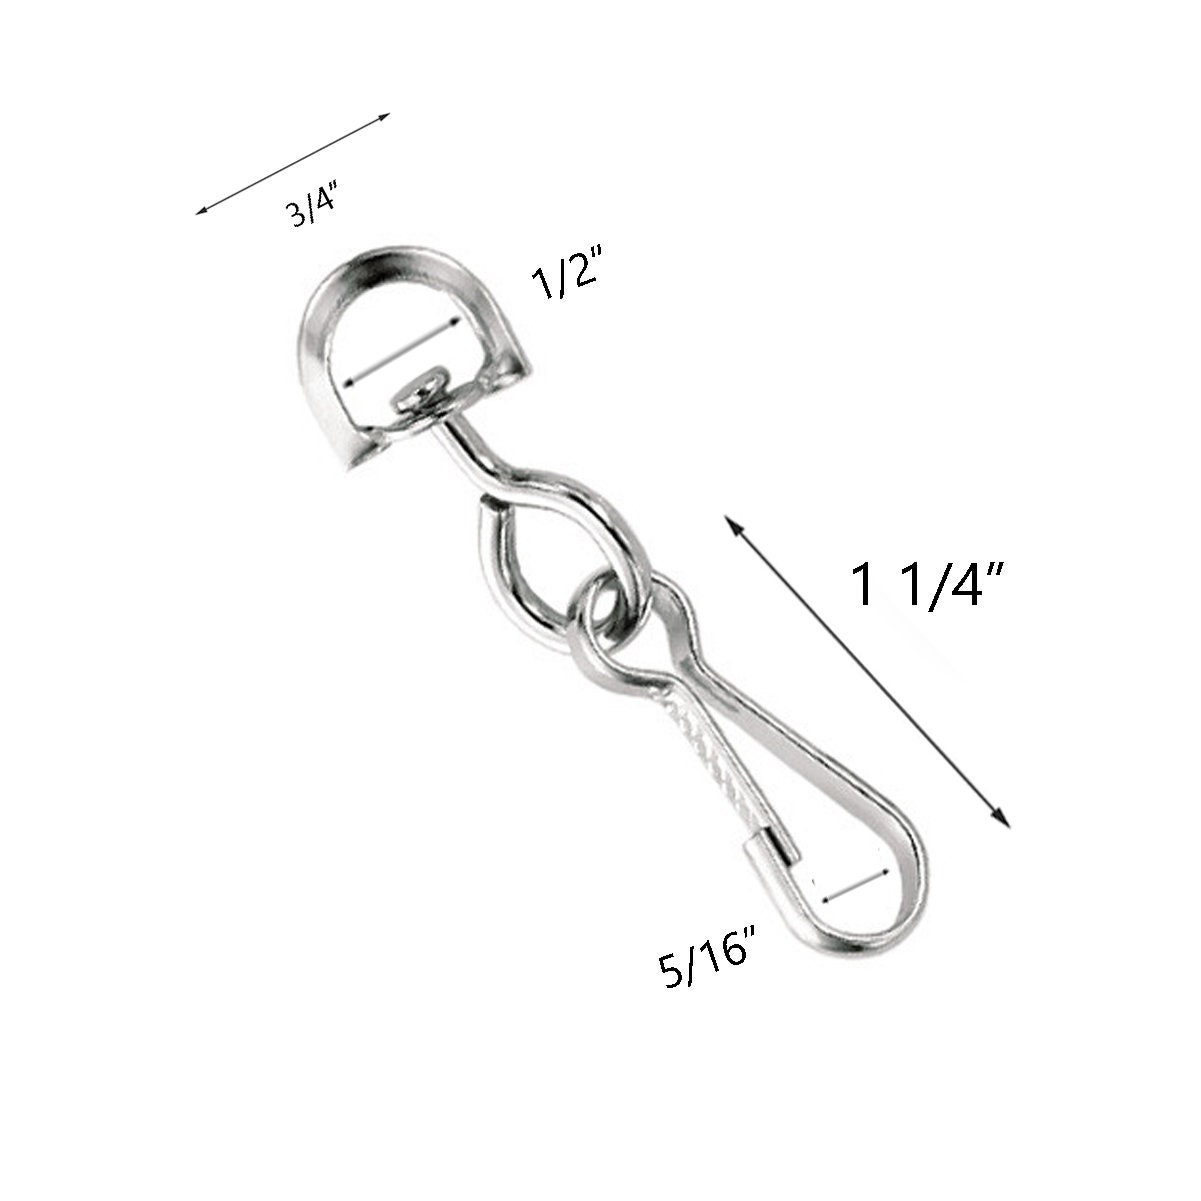 Bulk 100 Small Metal Swivel J Hook Clips Free Ship 1/2 D Ring for Craft  Making 1 1/4 Spring Snap Clasp for DIY Face Mask Lanyards 